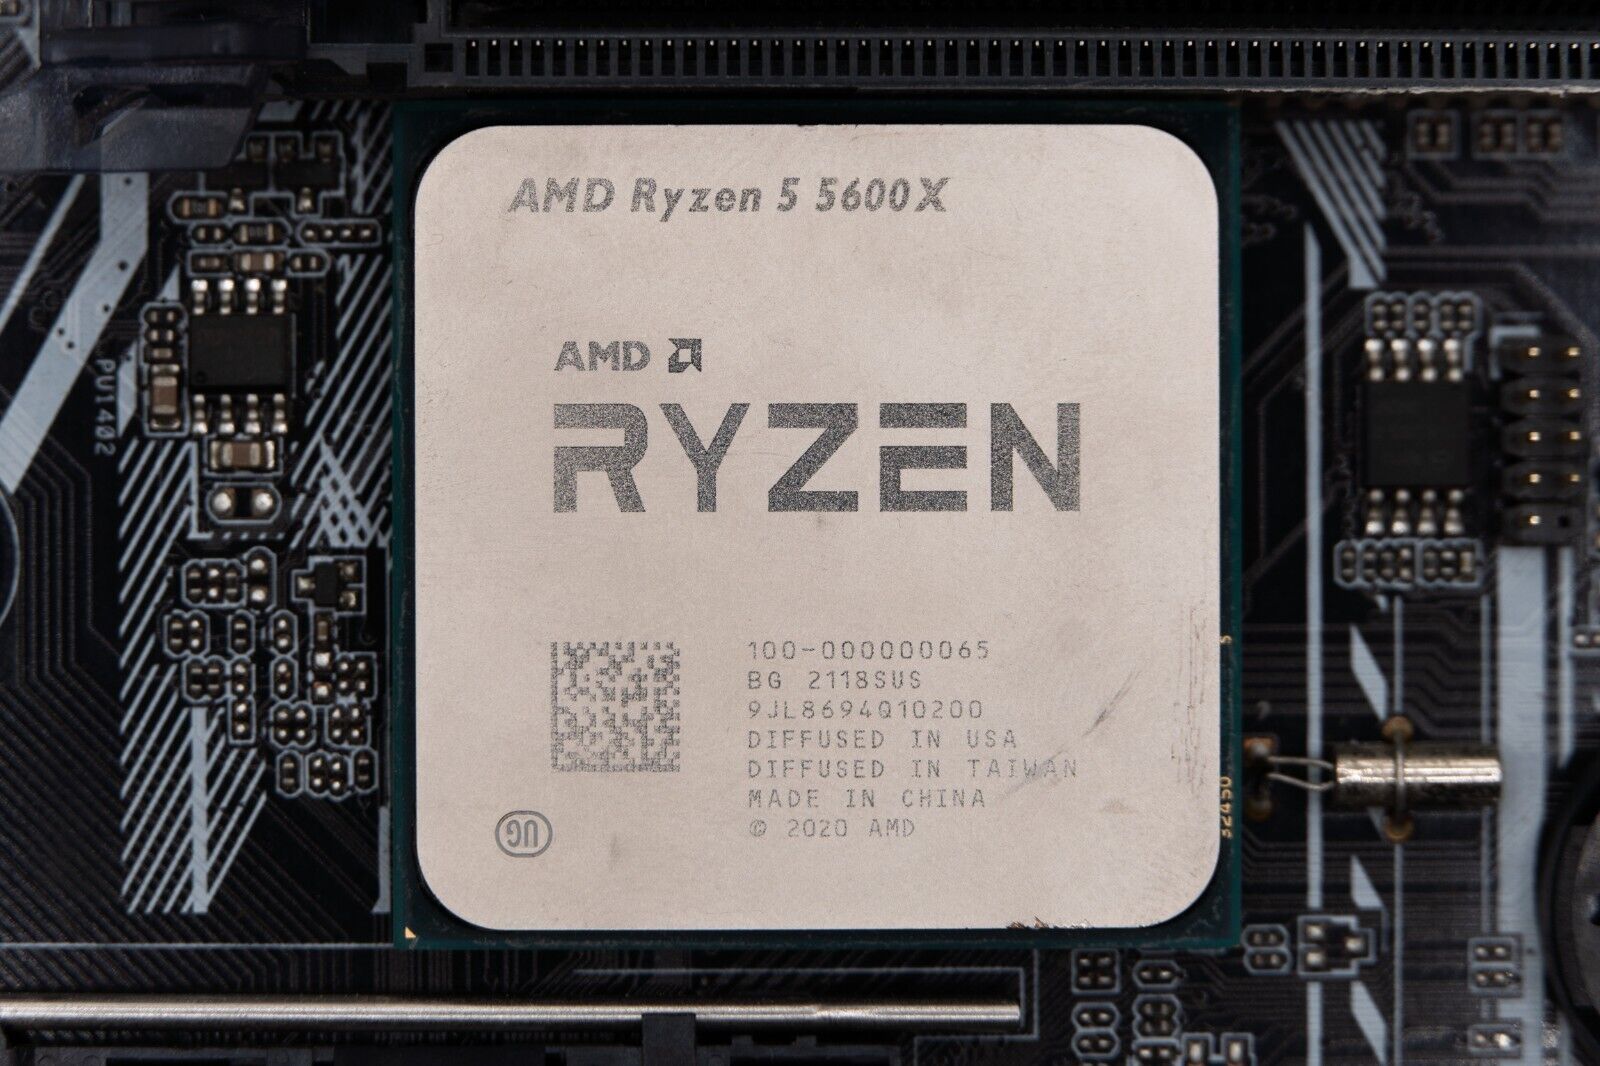 AMD Ryzen 5 5600X CPU 3.7 GHz 6 Cores (100-000000065) - Non-working / As-is